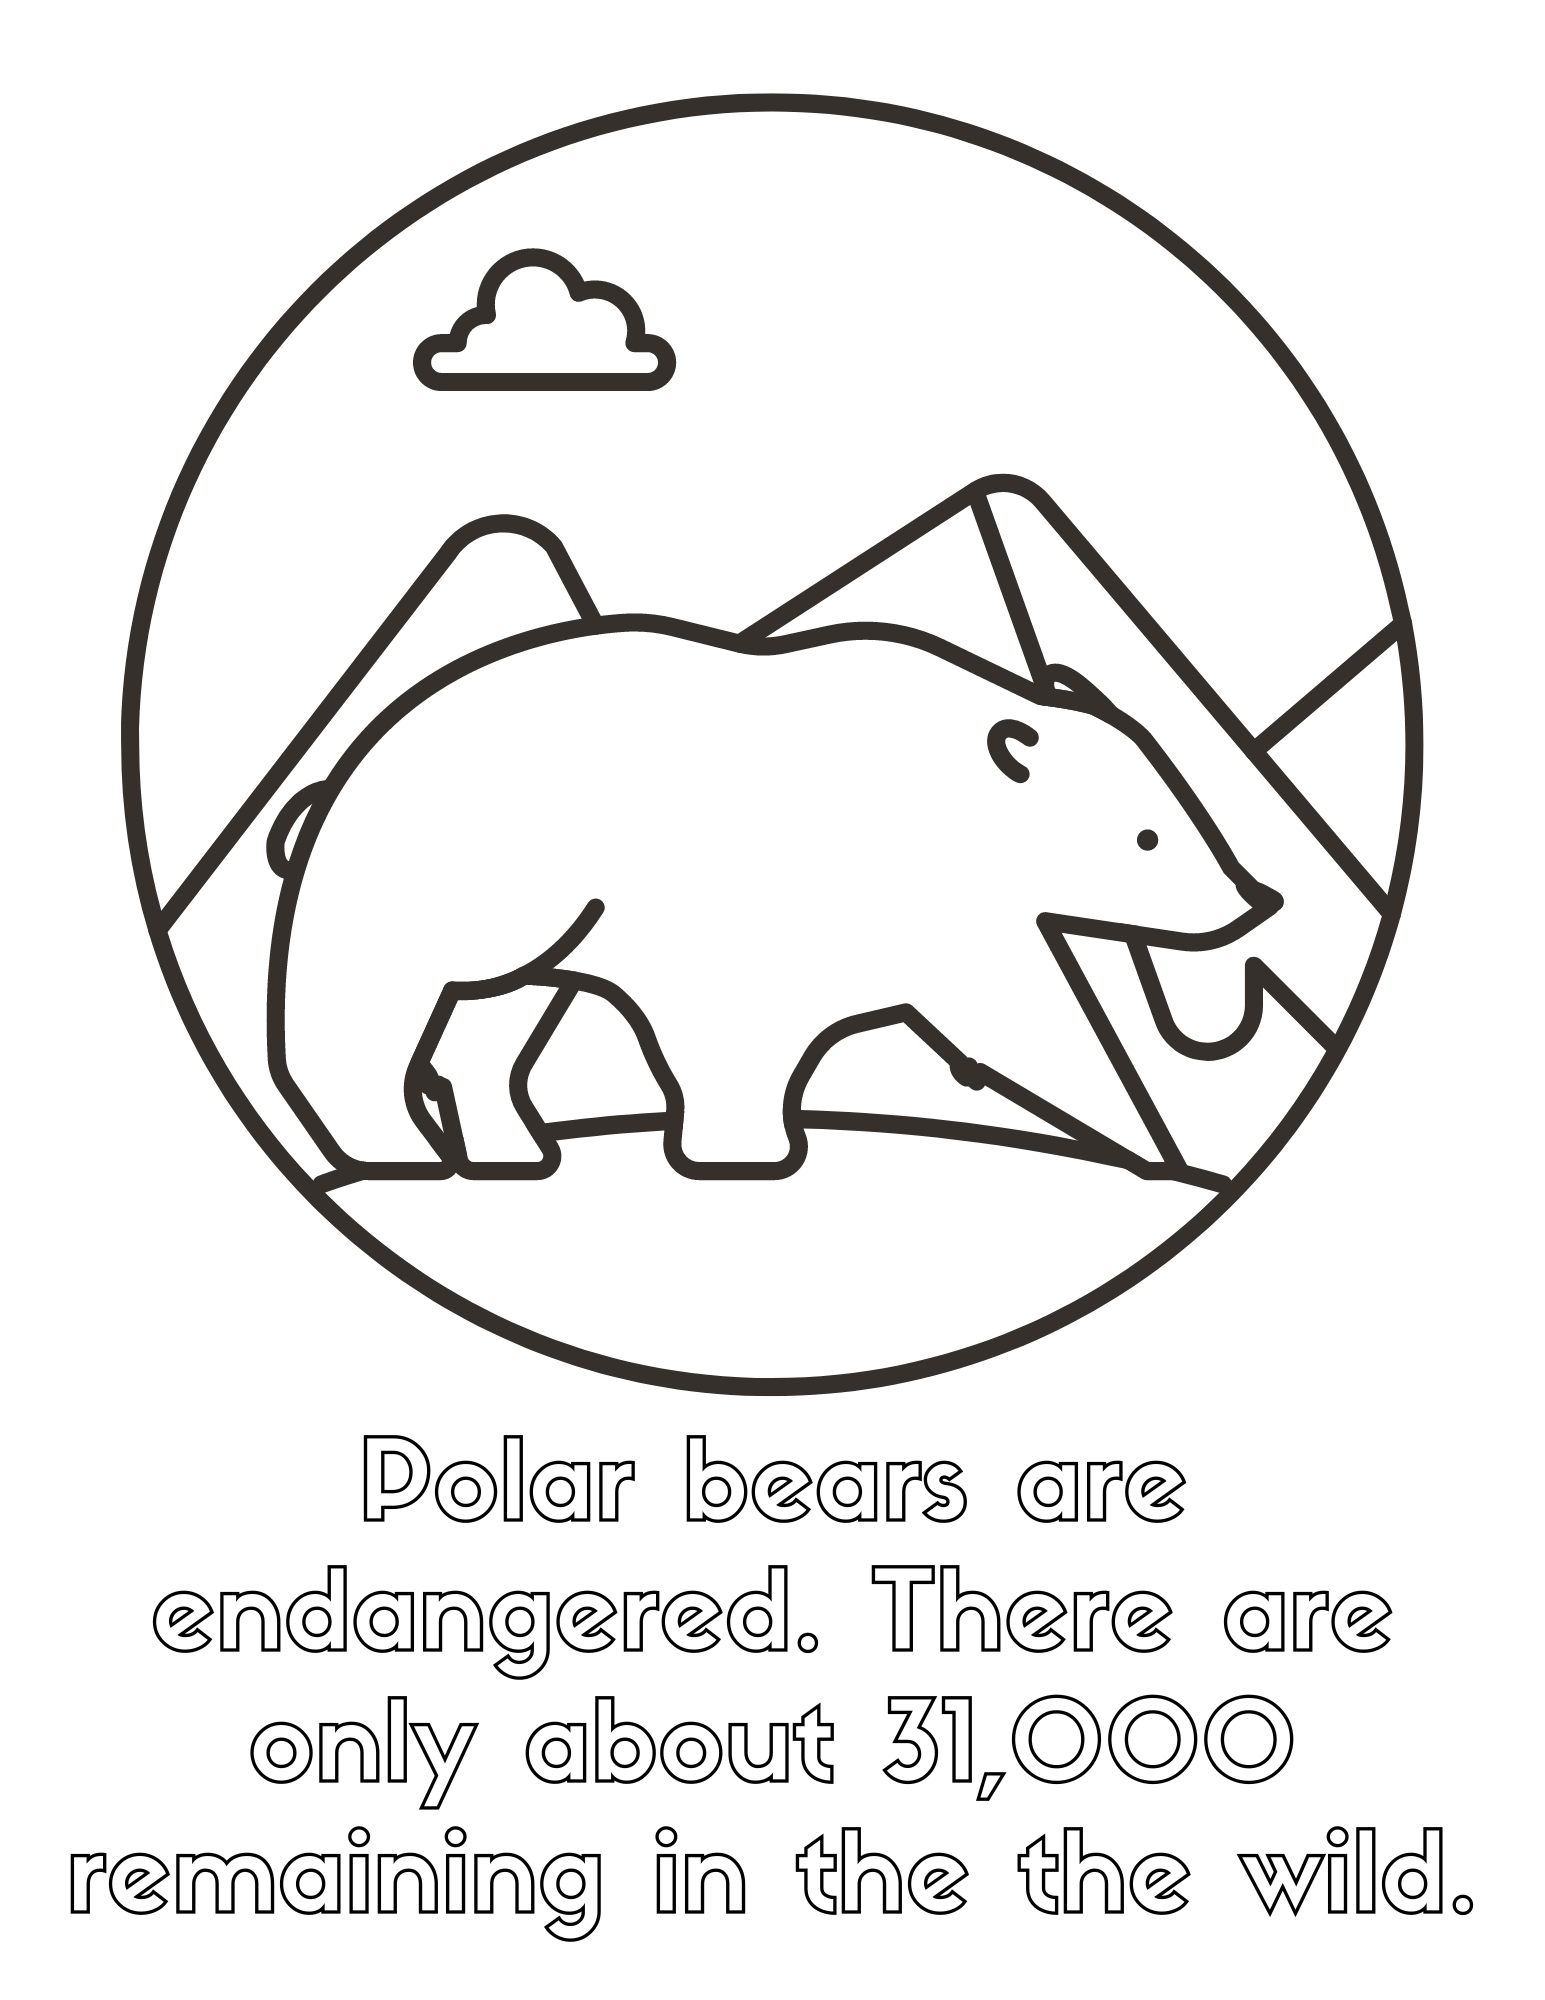 Free polar bear coloring pages for kids and adults